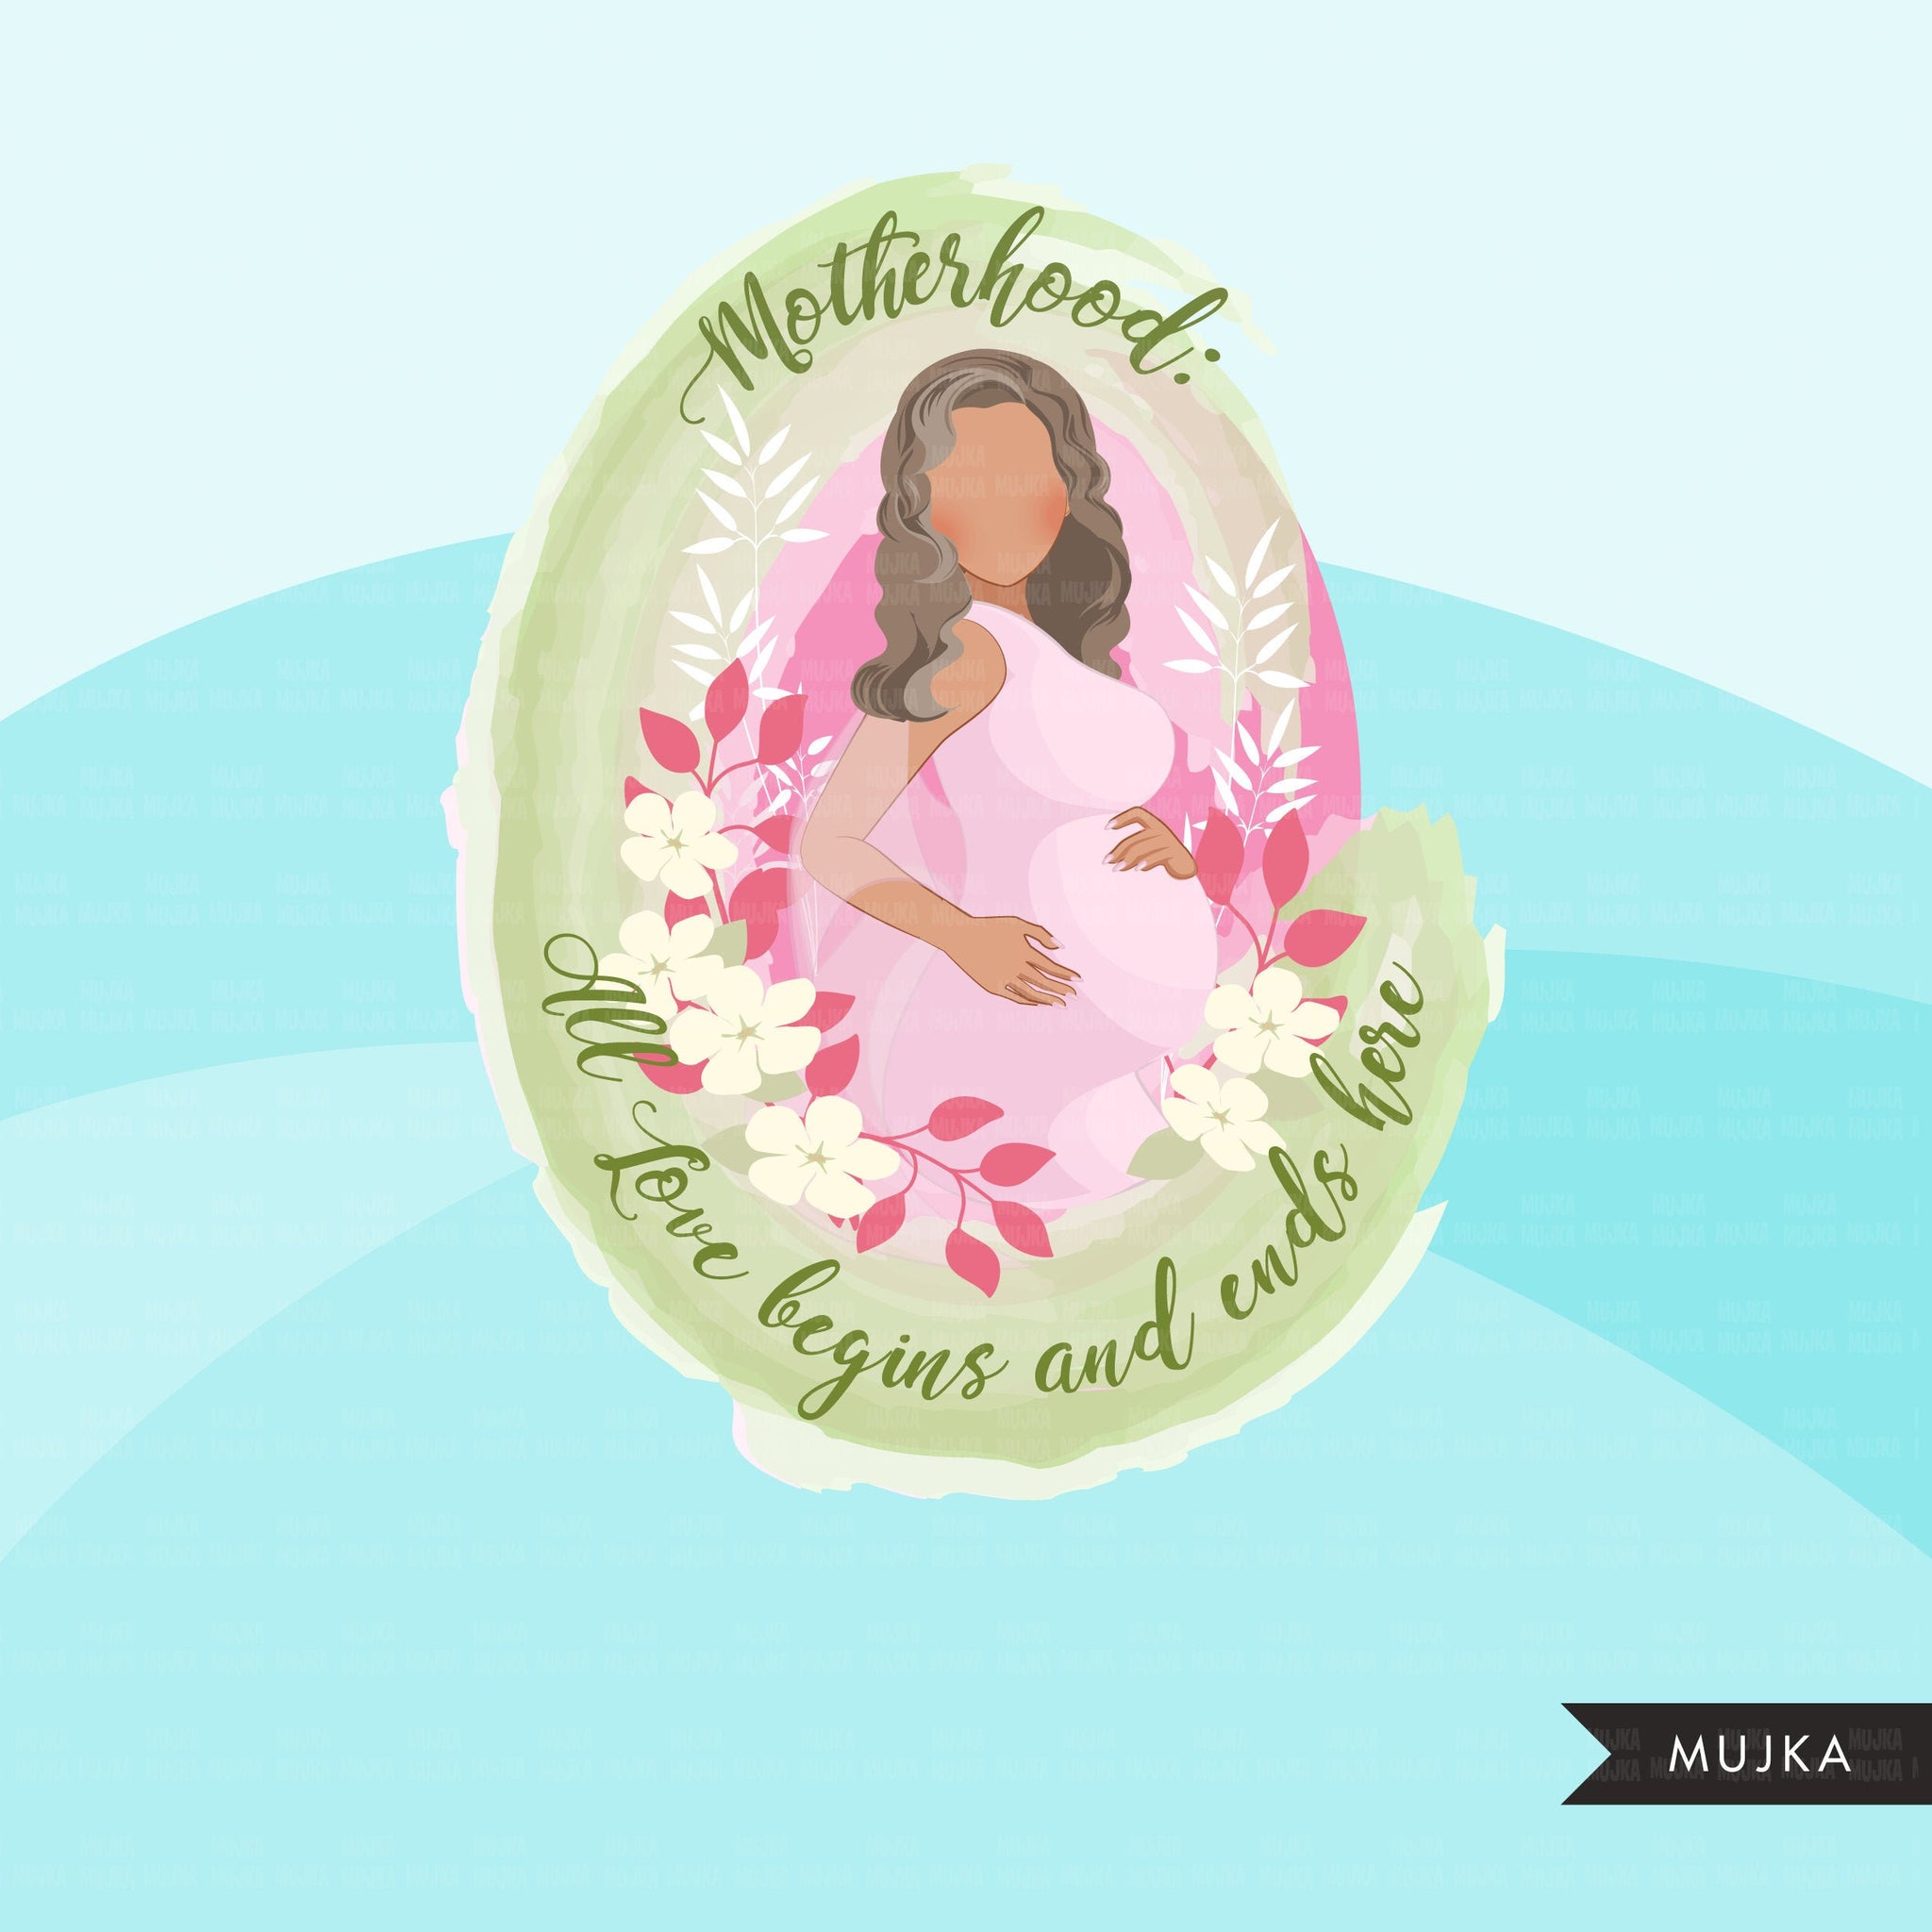 Mothers Day clipart, mother's day sublimation designs digital download, baby shower favors, wall art, pregnant Latino woman png